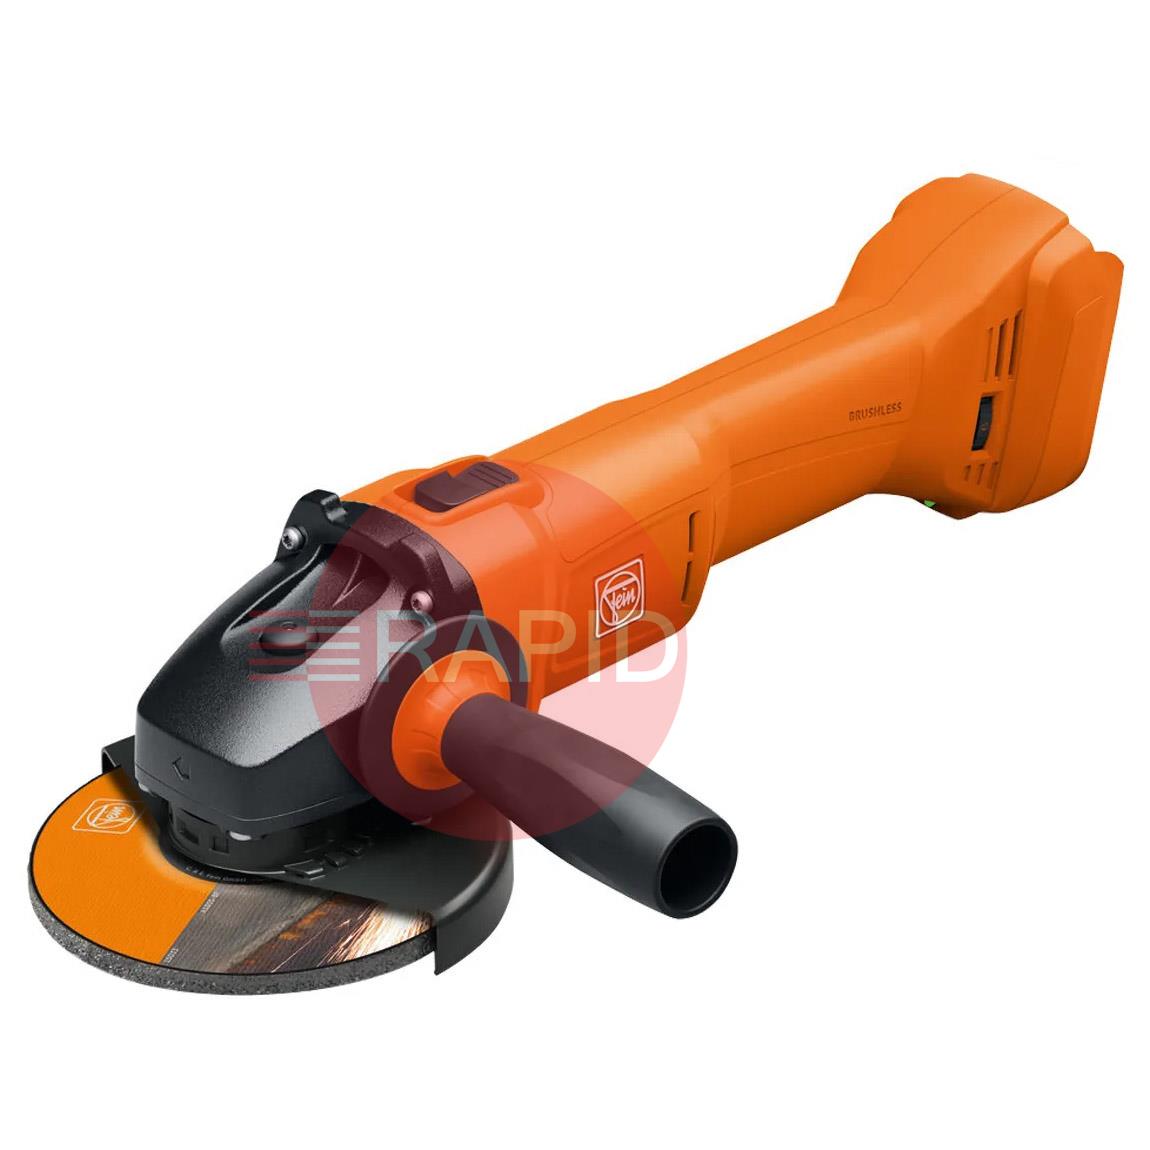 71220261000  FEIN CCG 18-125-10 AS 125mm Cordless Angle Grinder (Bare Unit)